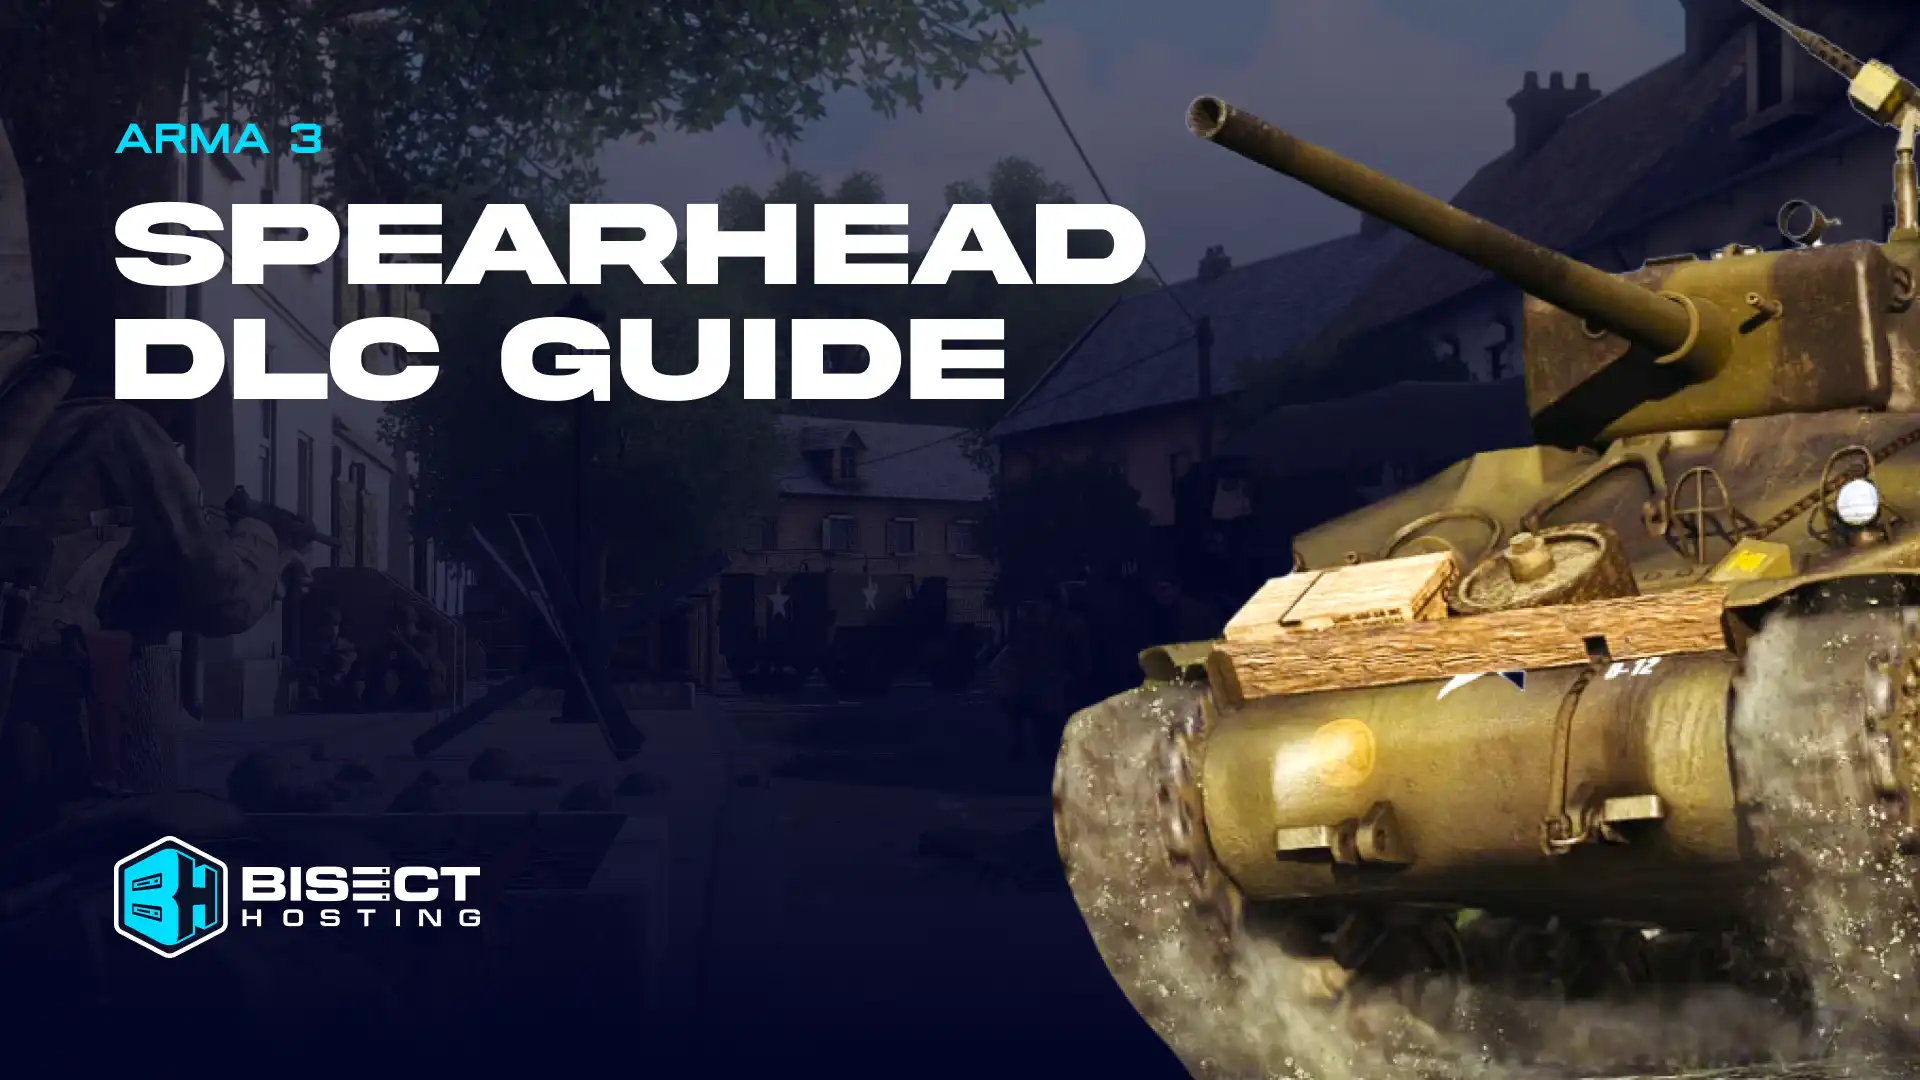 Arma 3 Spearhead DLC: New Factions, Vehicle Variants, & More